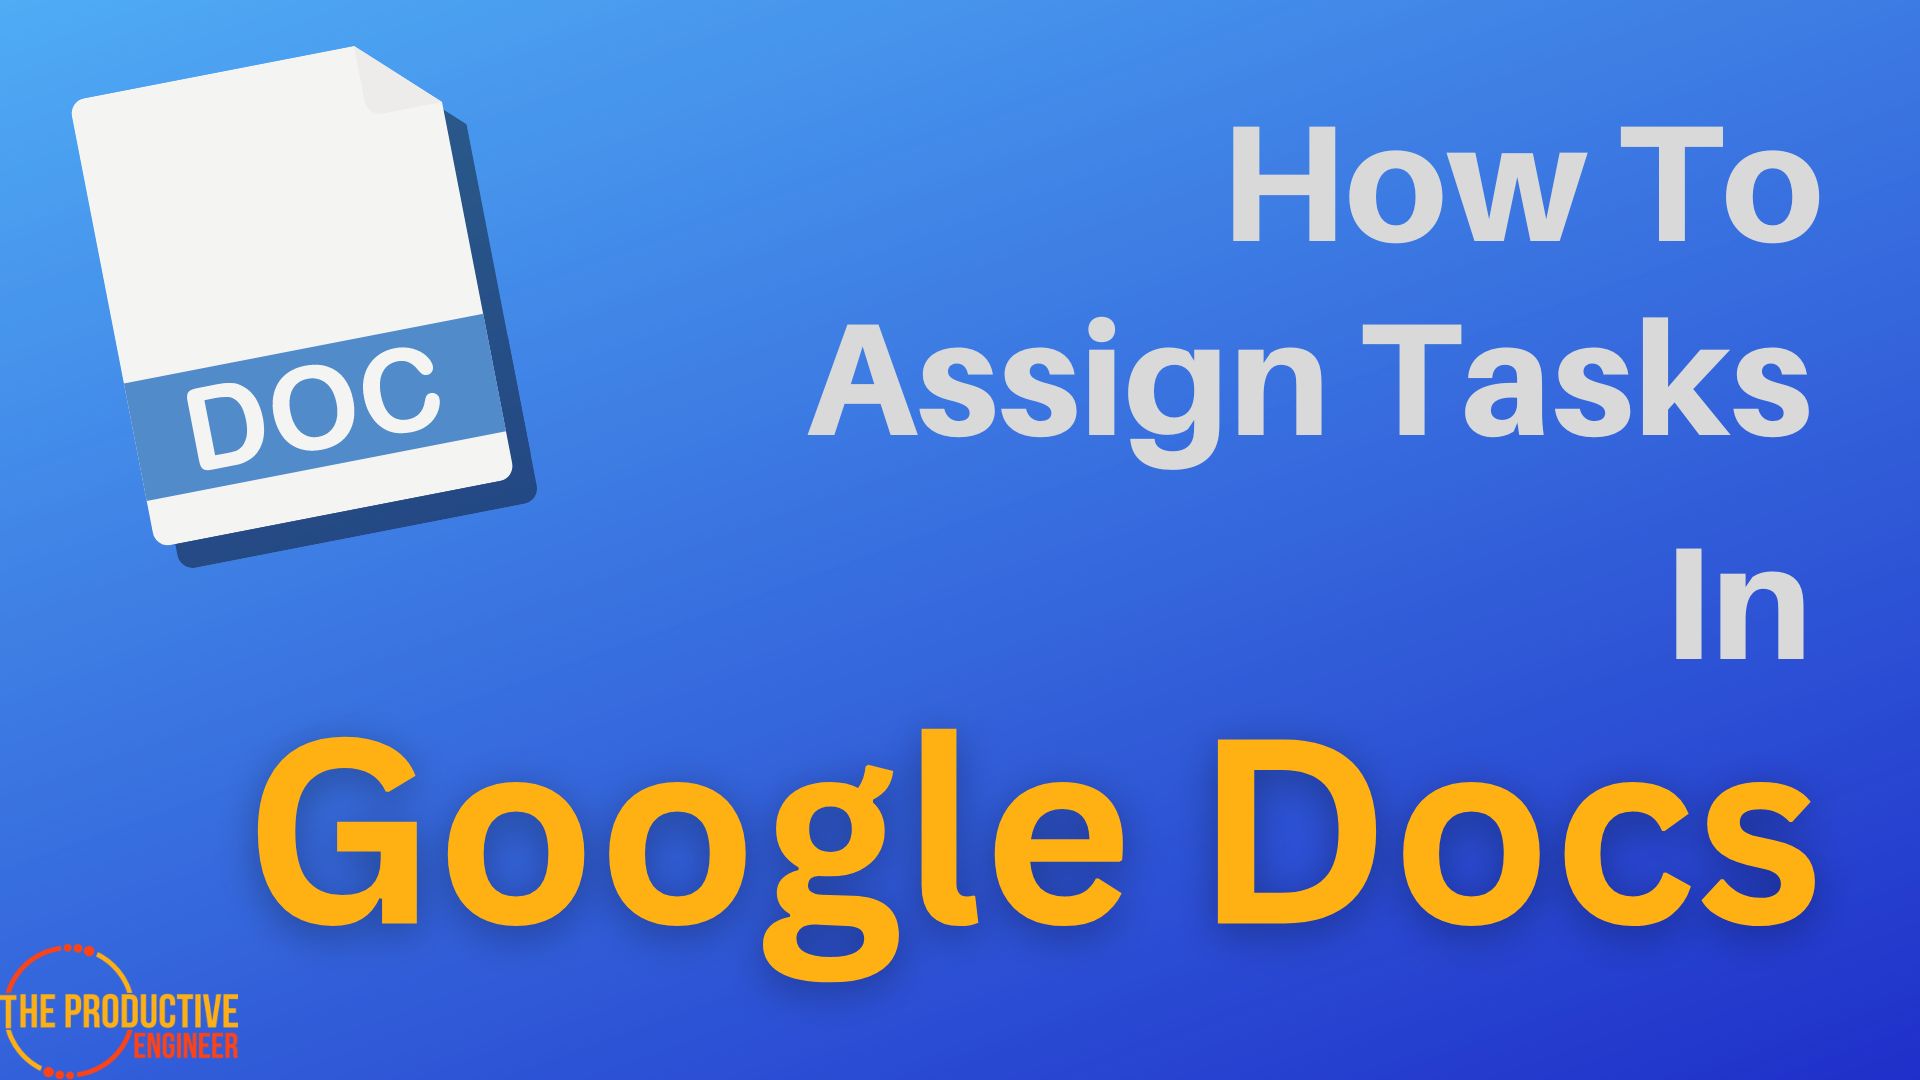 How To Assign Tasks In Google Docs